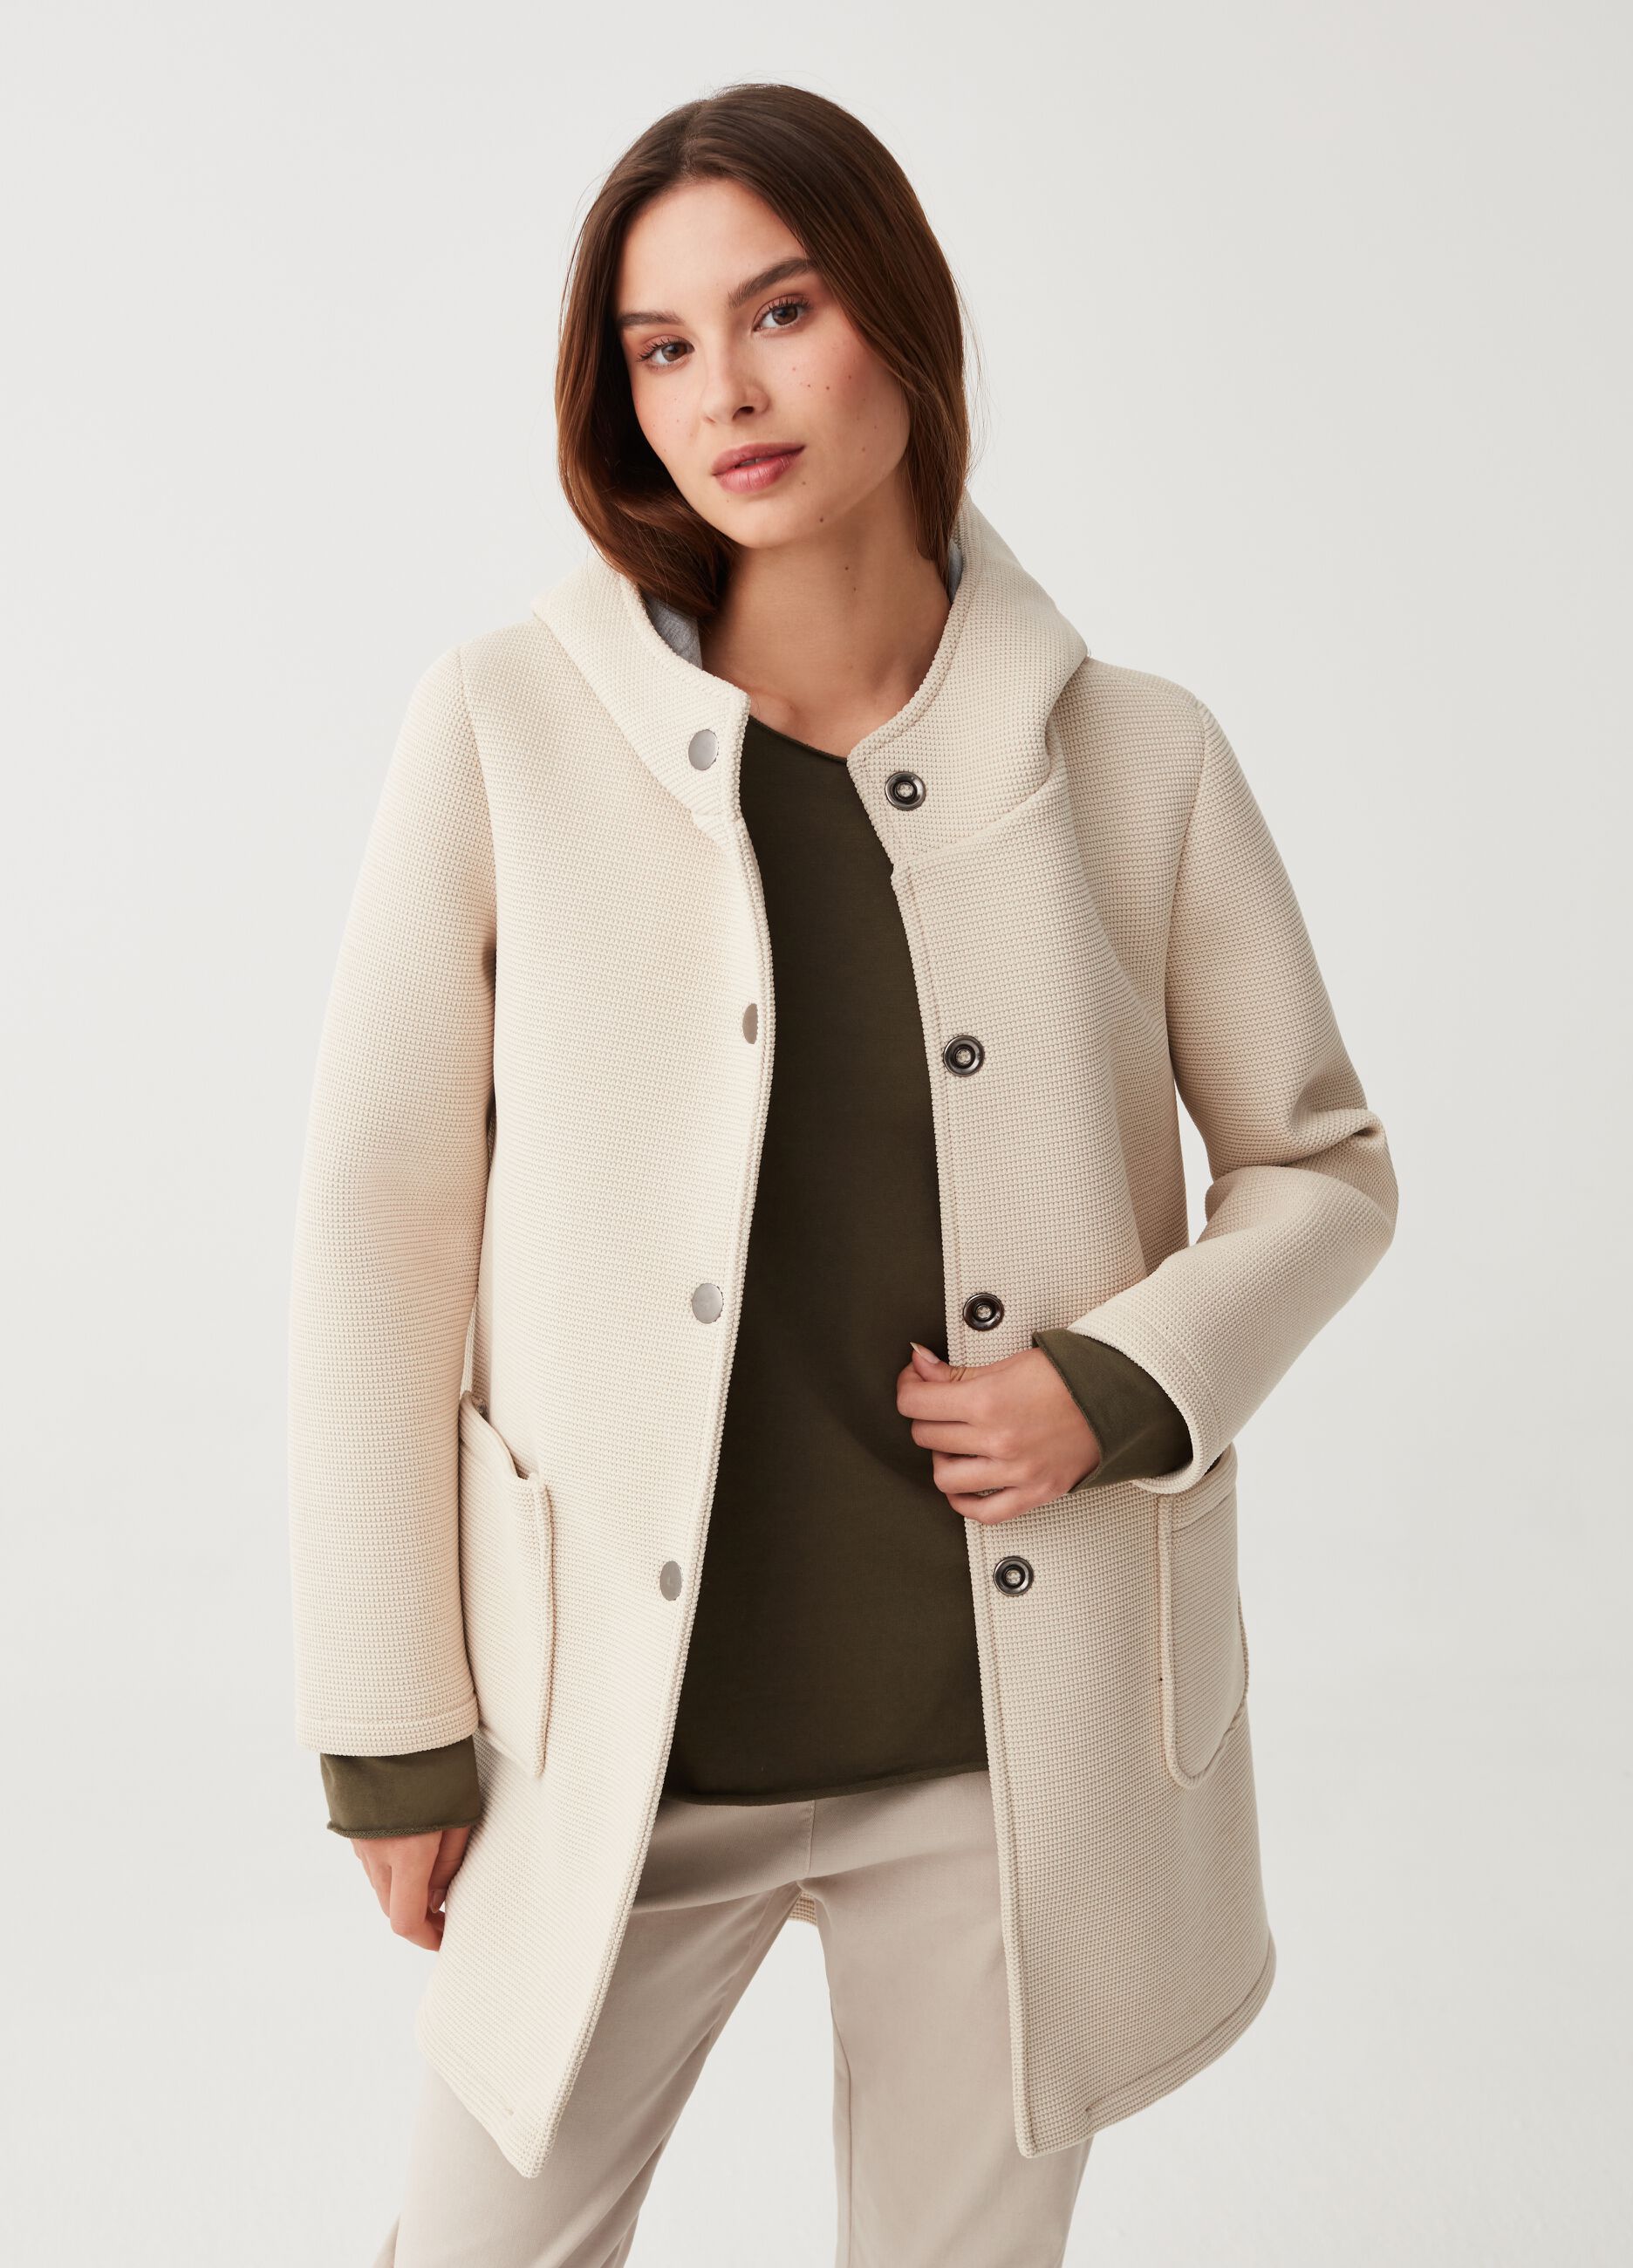 HYBRID Woman's Natural Long jacket with micro waffle weave